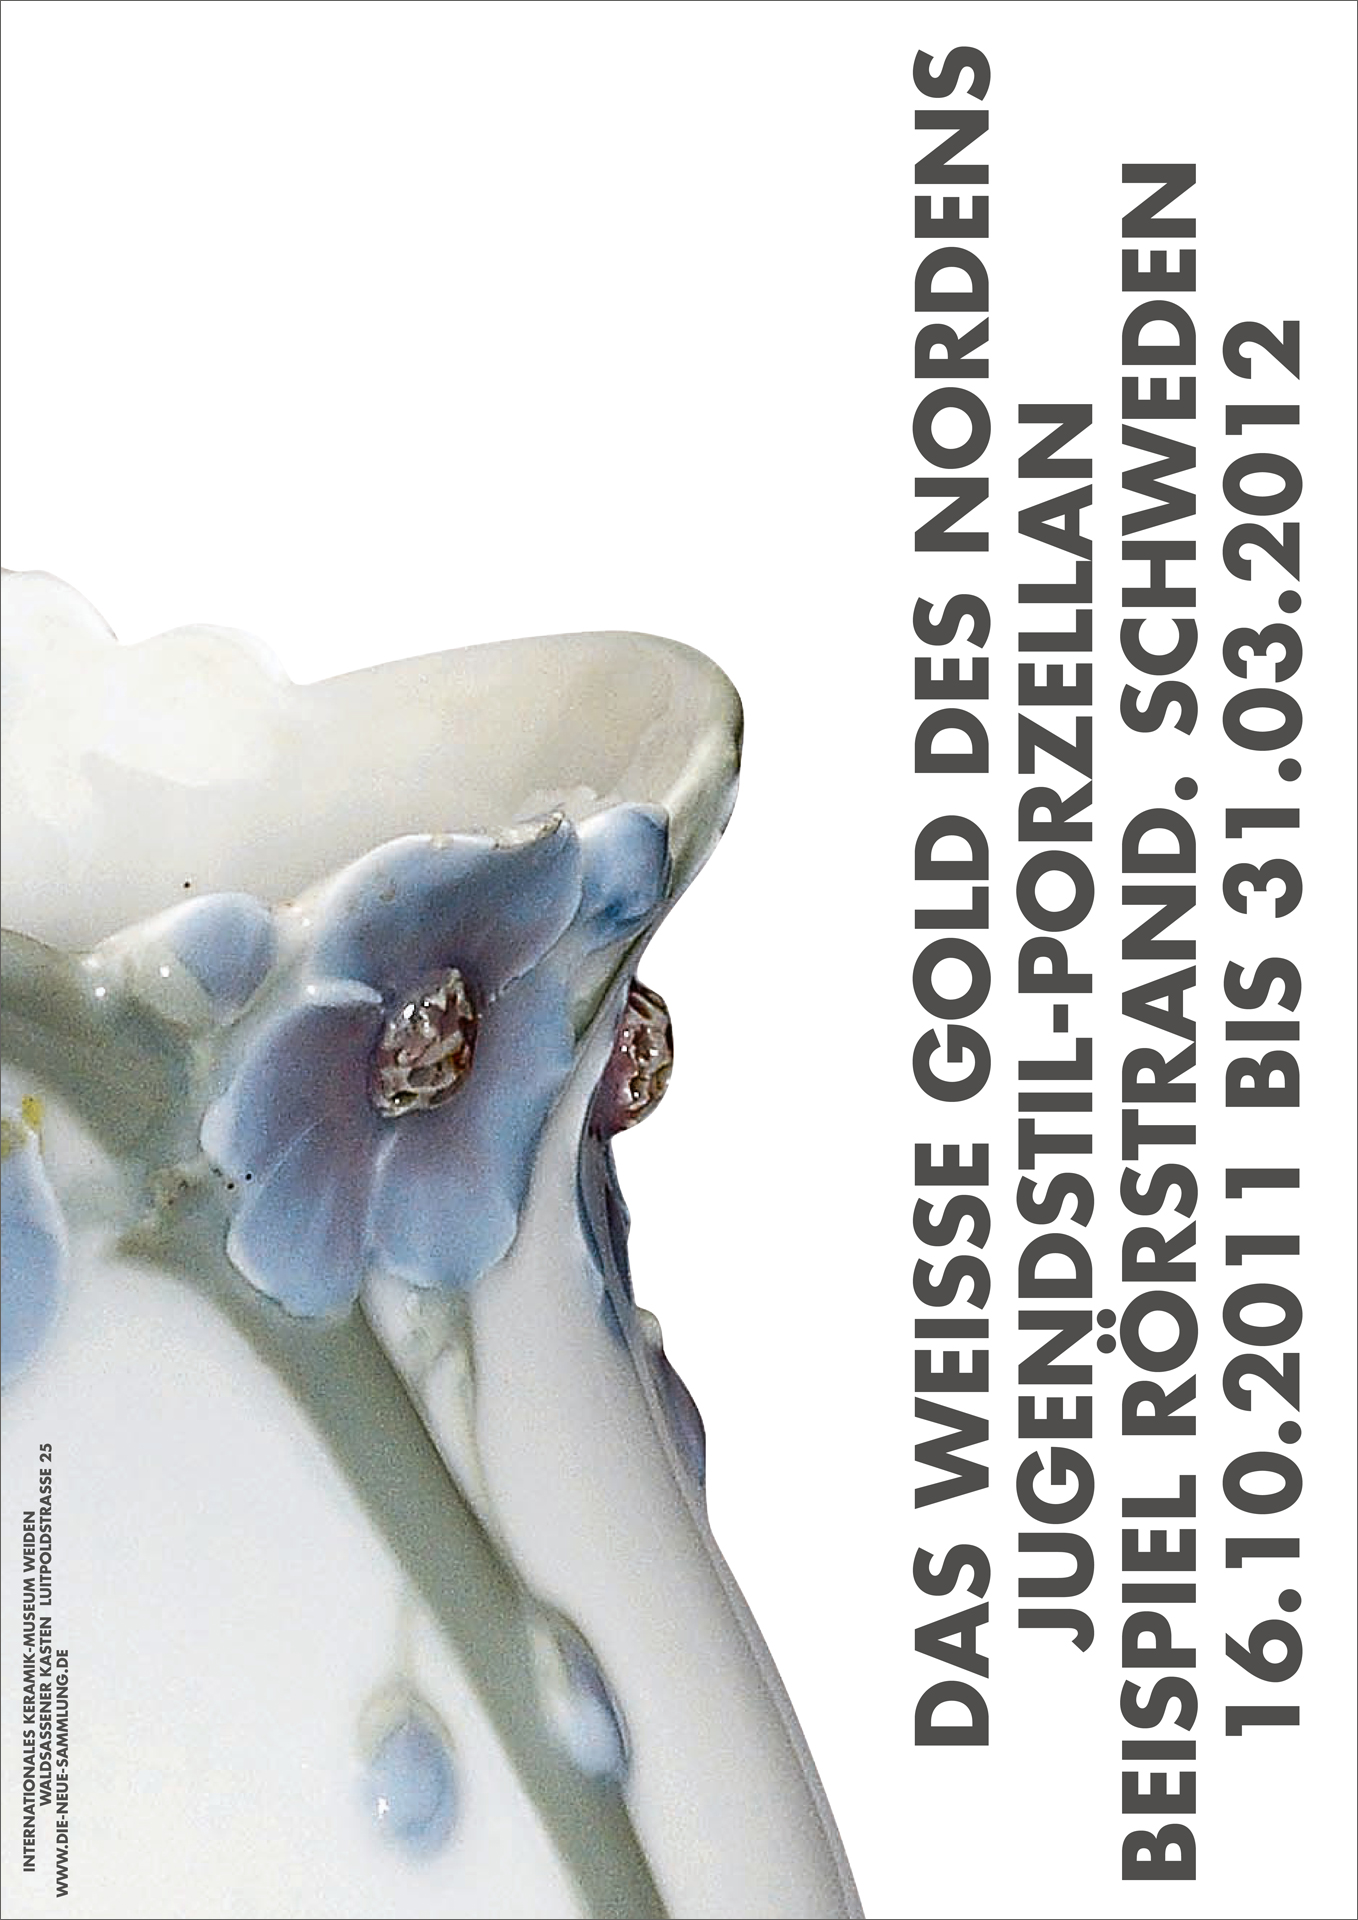 The upper, right-hand edge of a porcelain vase with a floral motif of sage green branches and light blue flowers can be seen. To the right of the vase, the exhibition title runs vertically across the poster in black lettering.